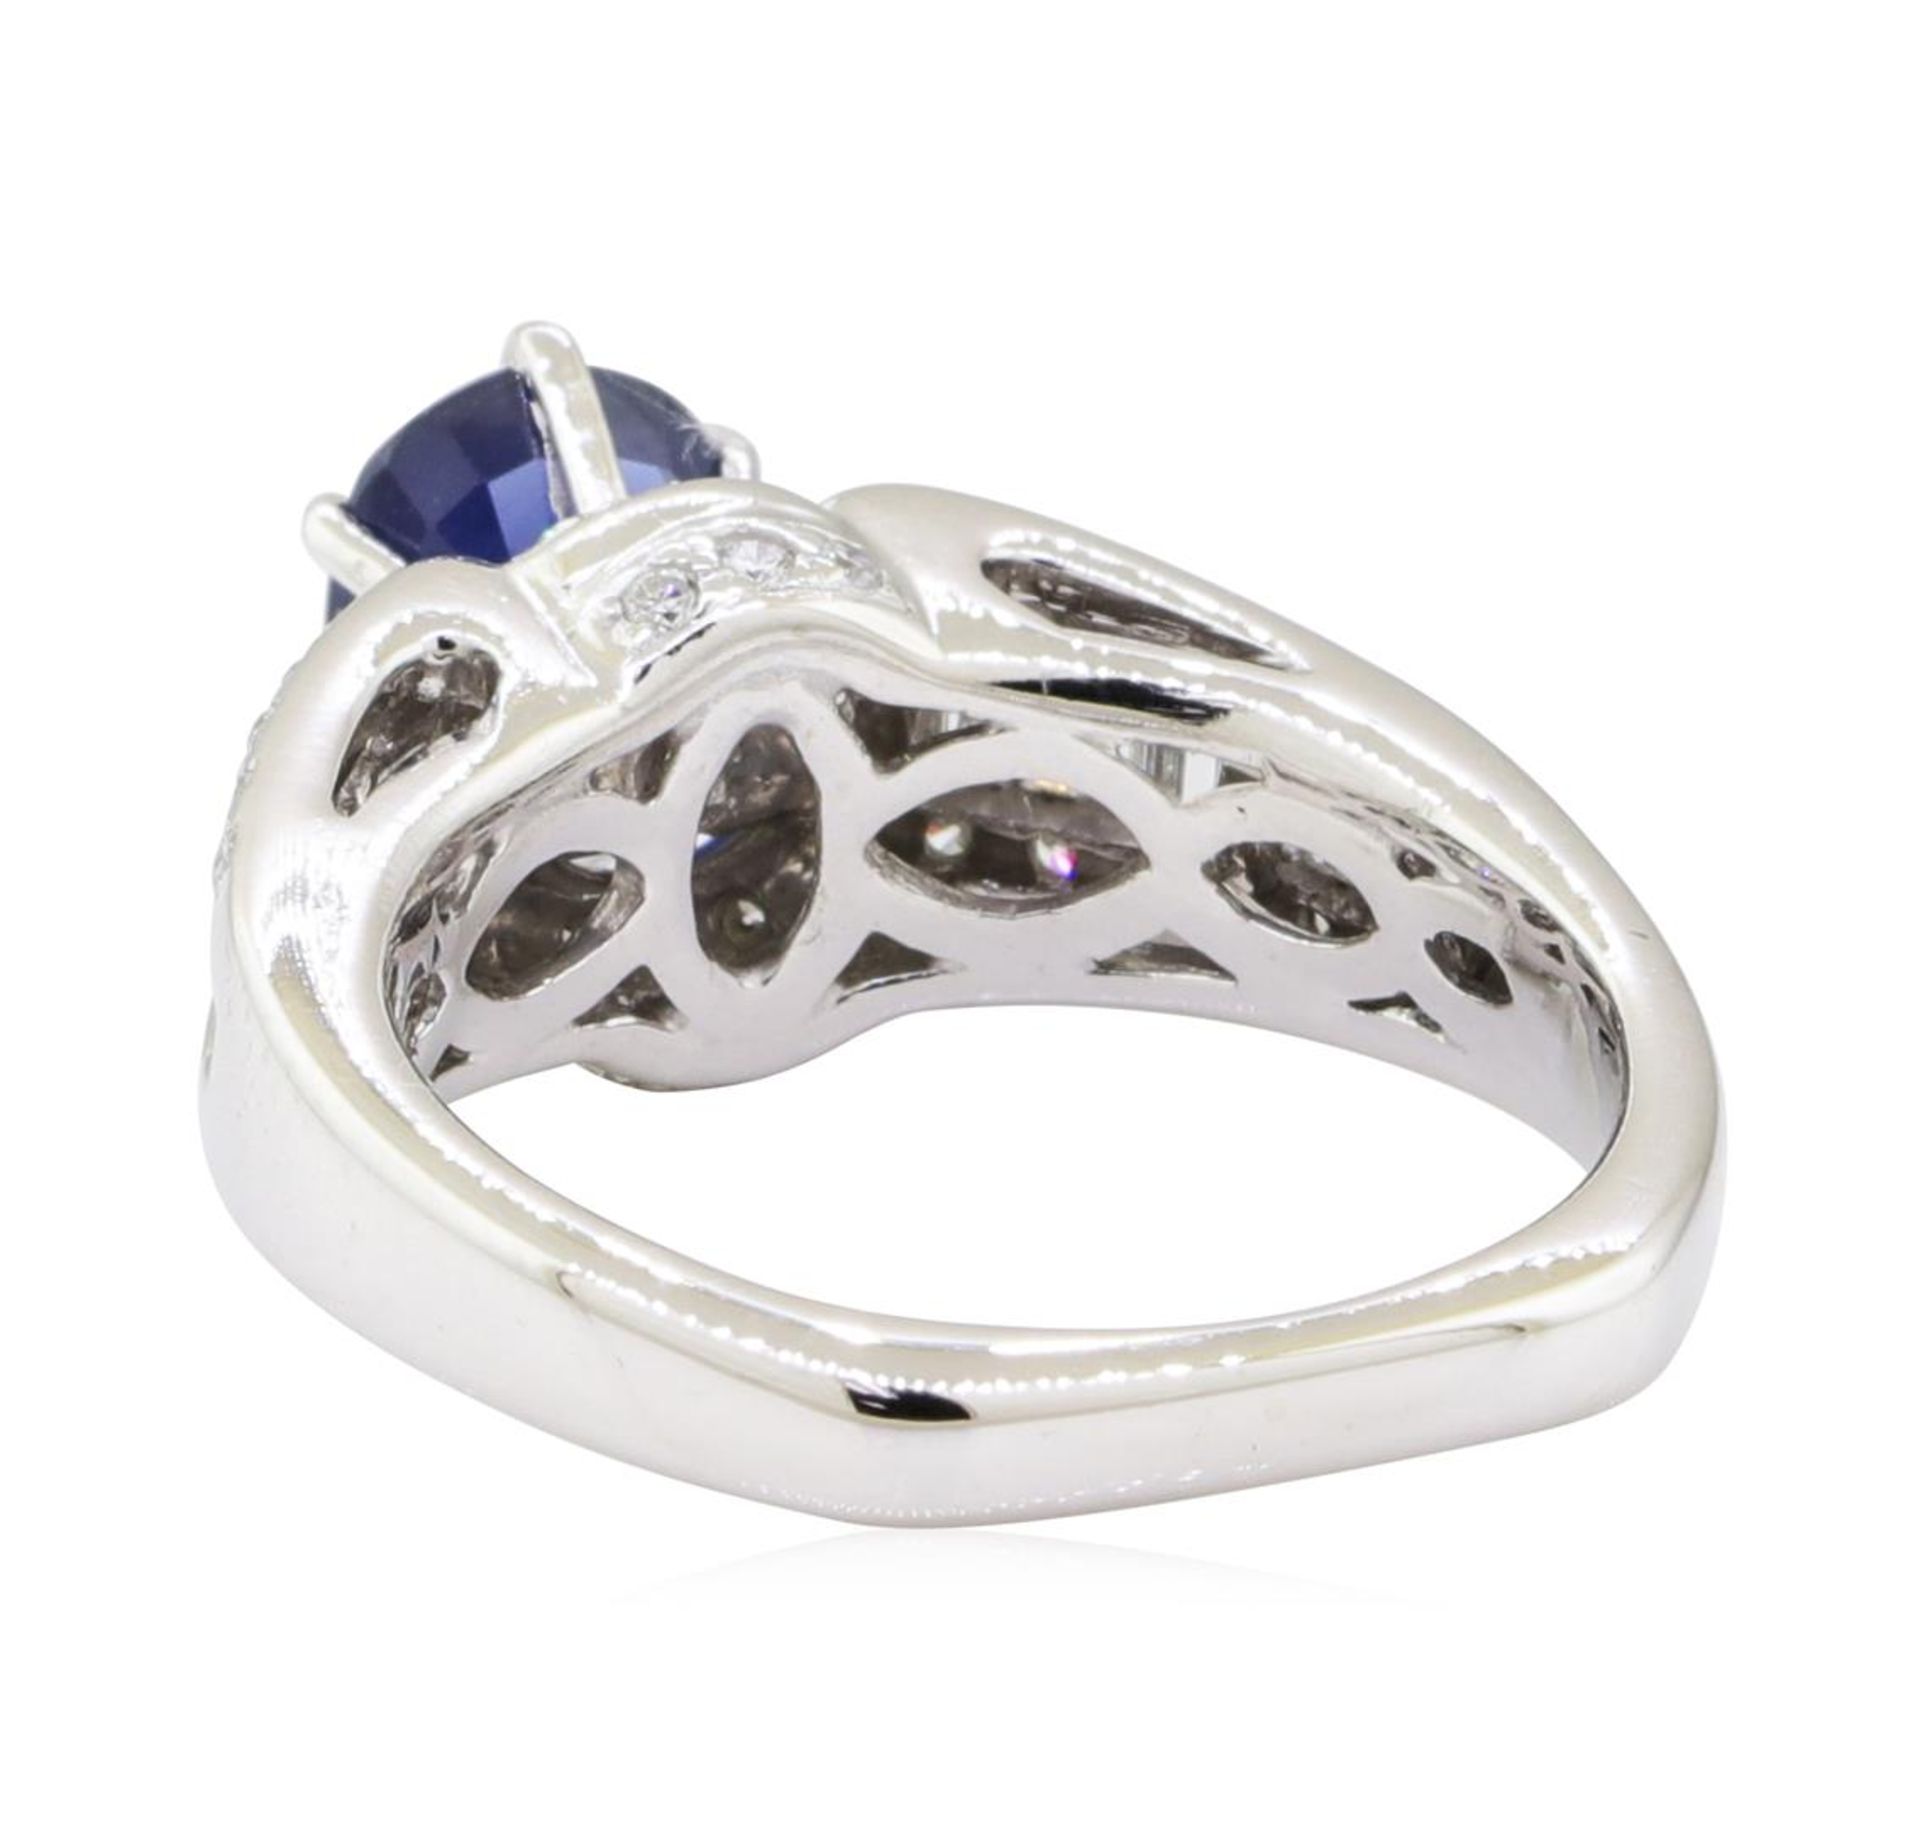 2.01 ctw Sapphire and Diamond Ring - 14KT White Gold - Image 6 of 10